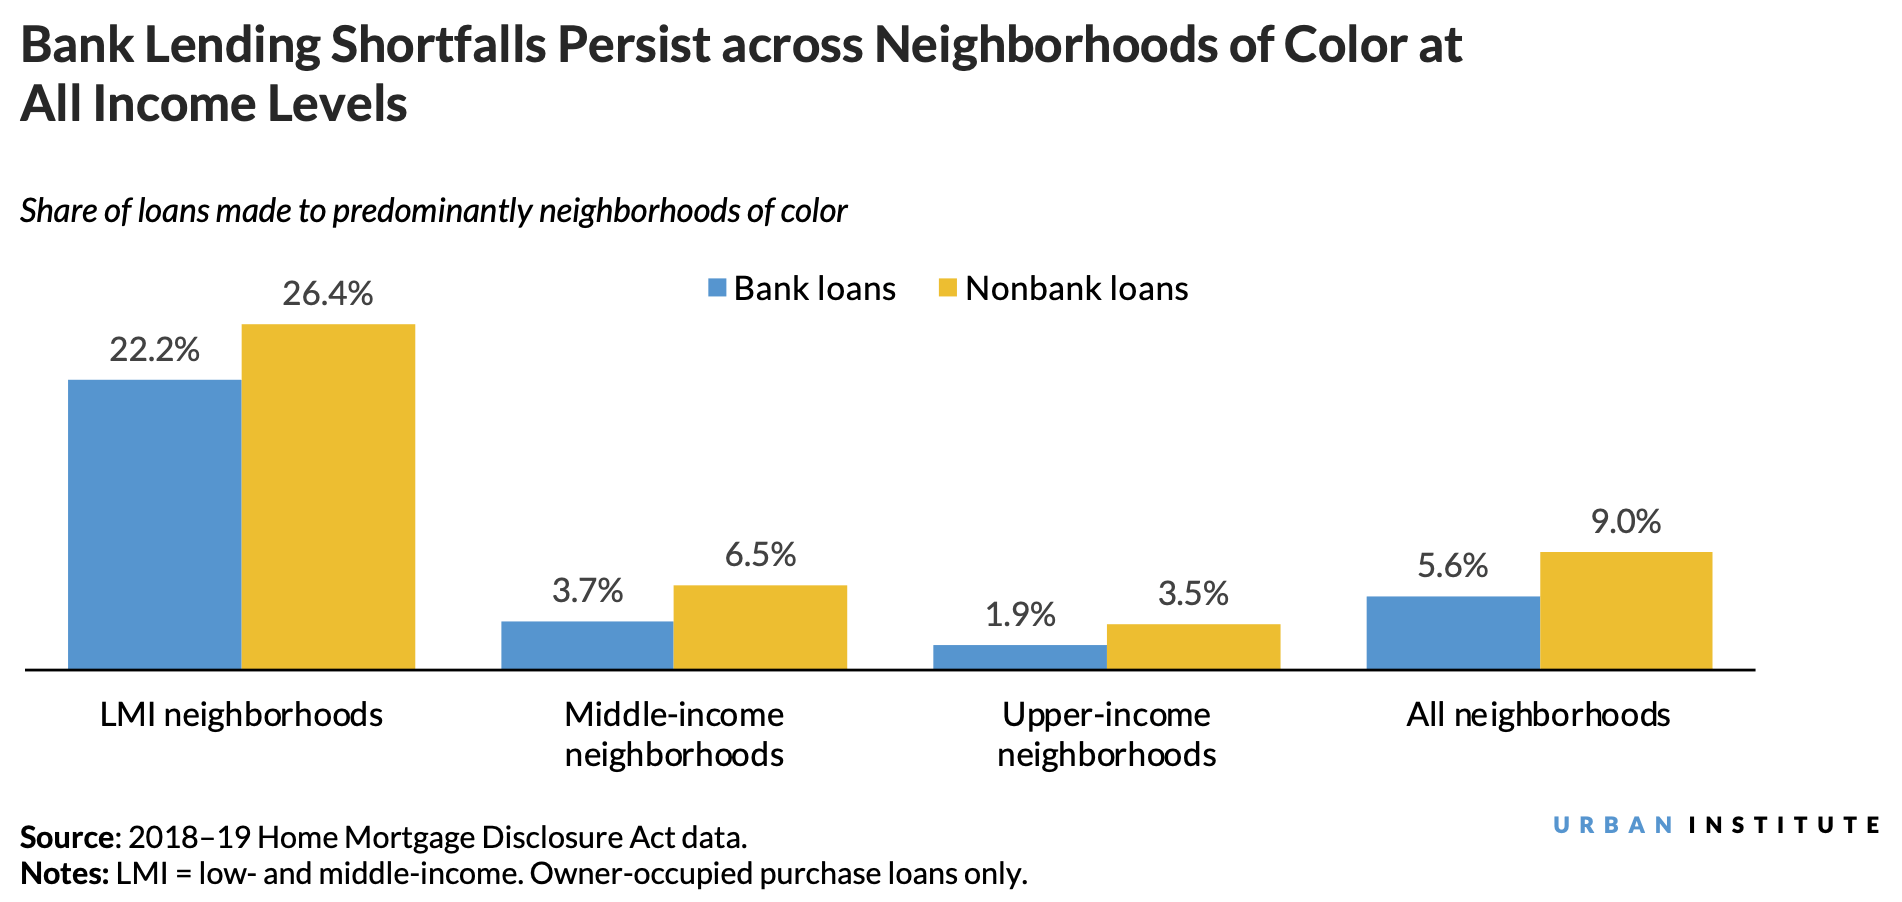 Bar chart showing that across all income levels, banks make a smaller share of loans to borrowers of color